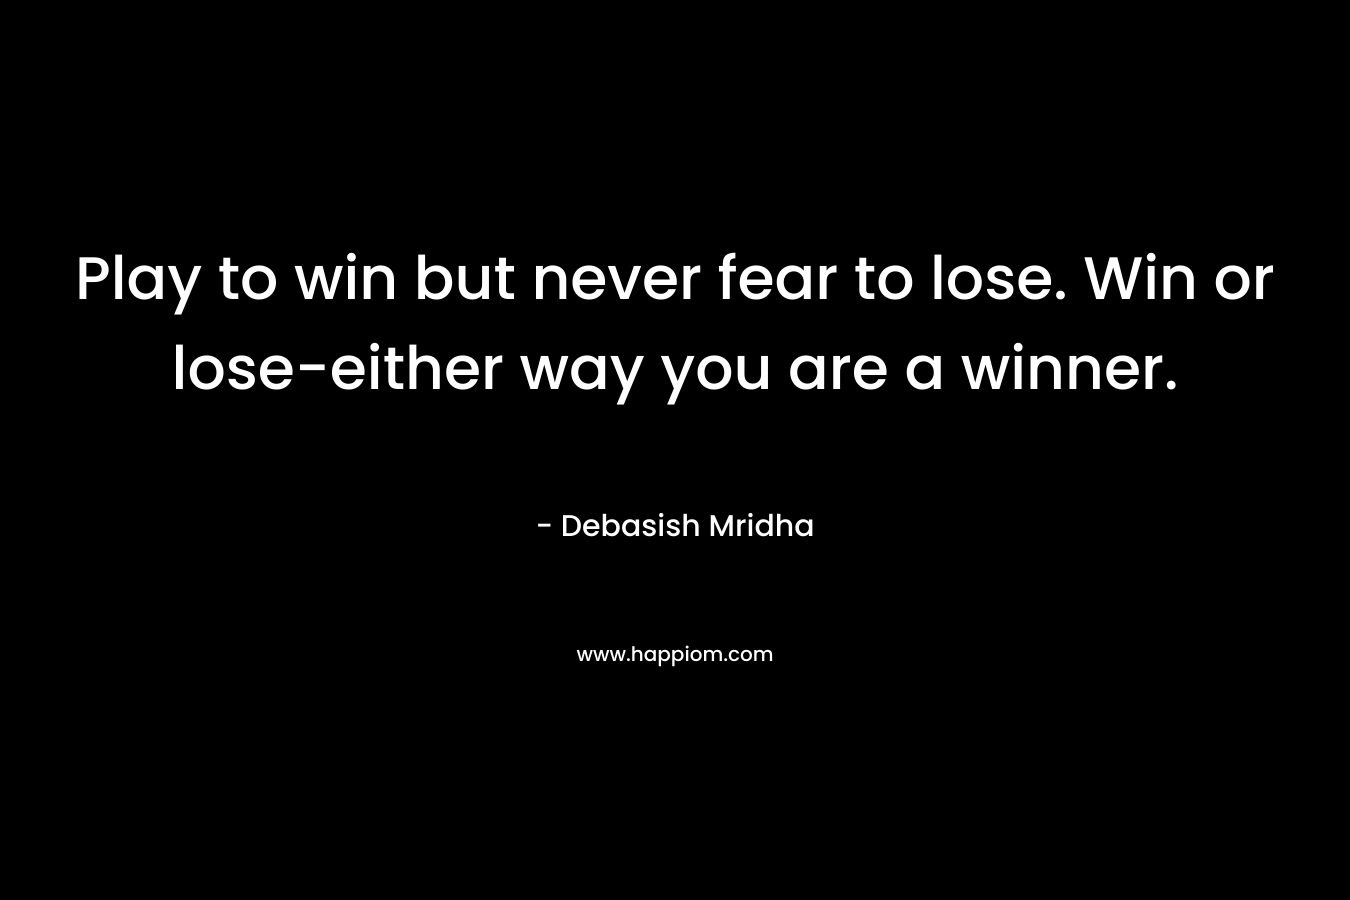 Play to win but never fear to lose. Win or lose-either way you are a winner.